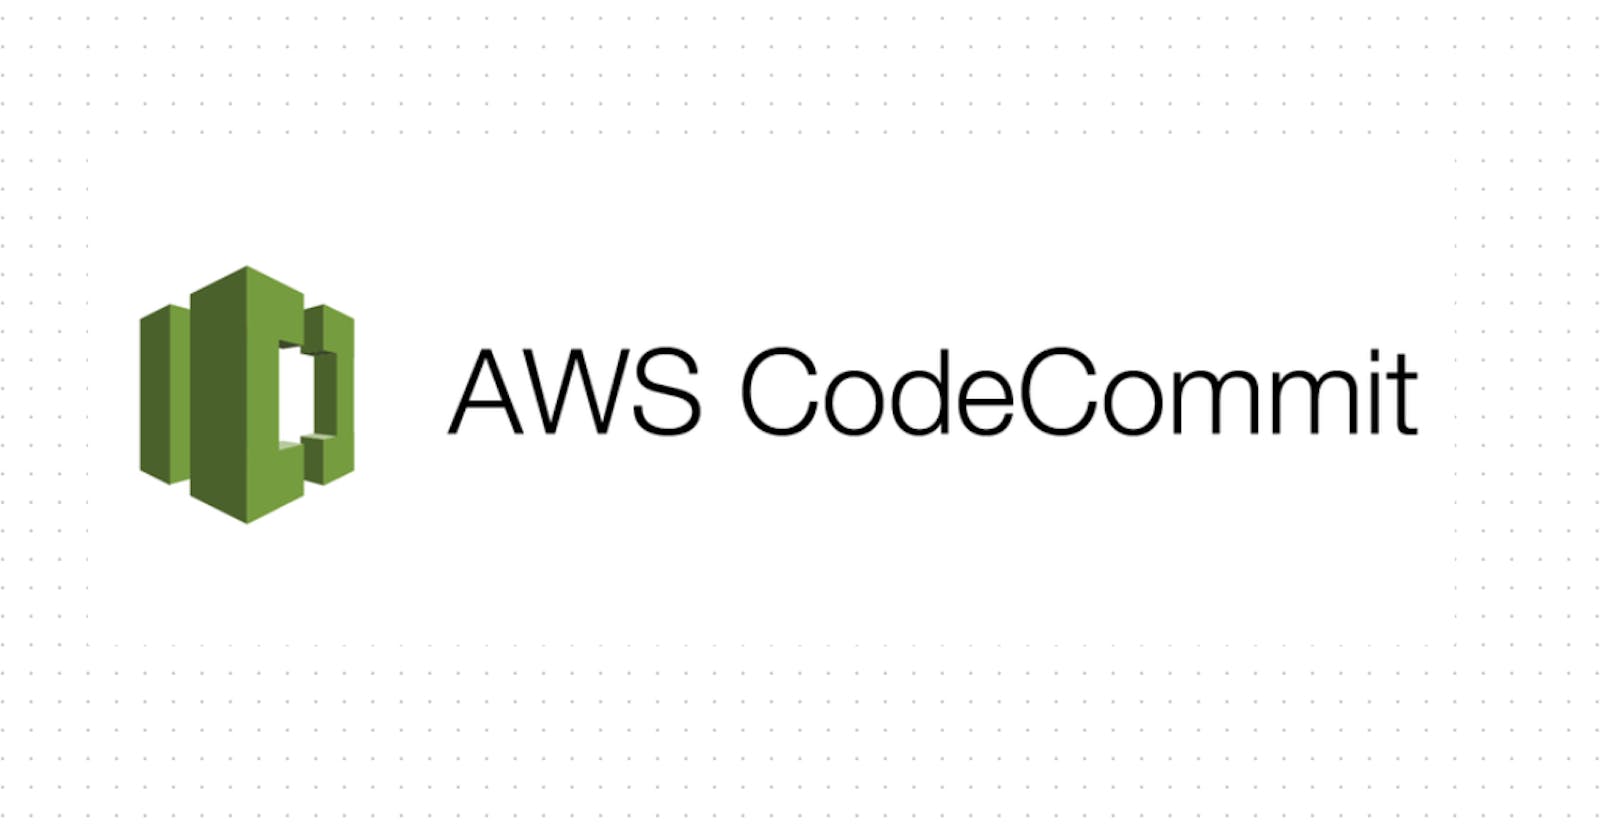 Day 50: Your CI/CD pipeline on AWS - Part-1 🚀 ☁